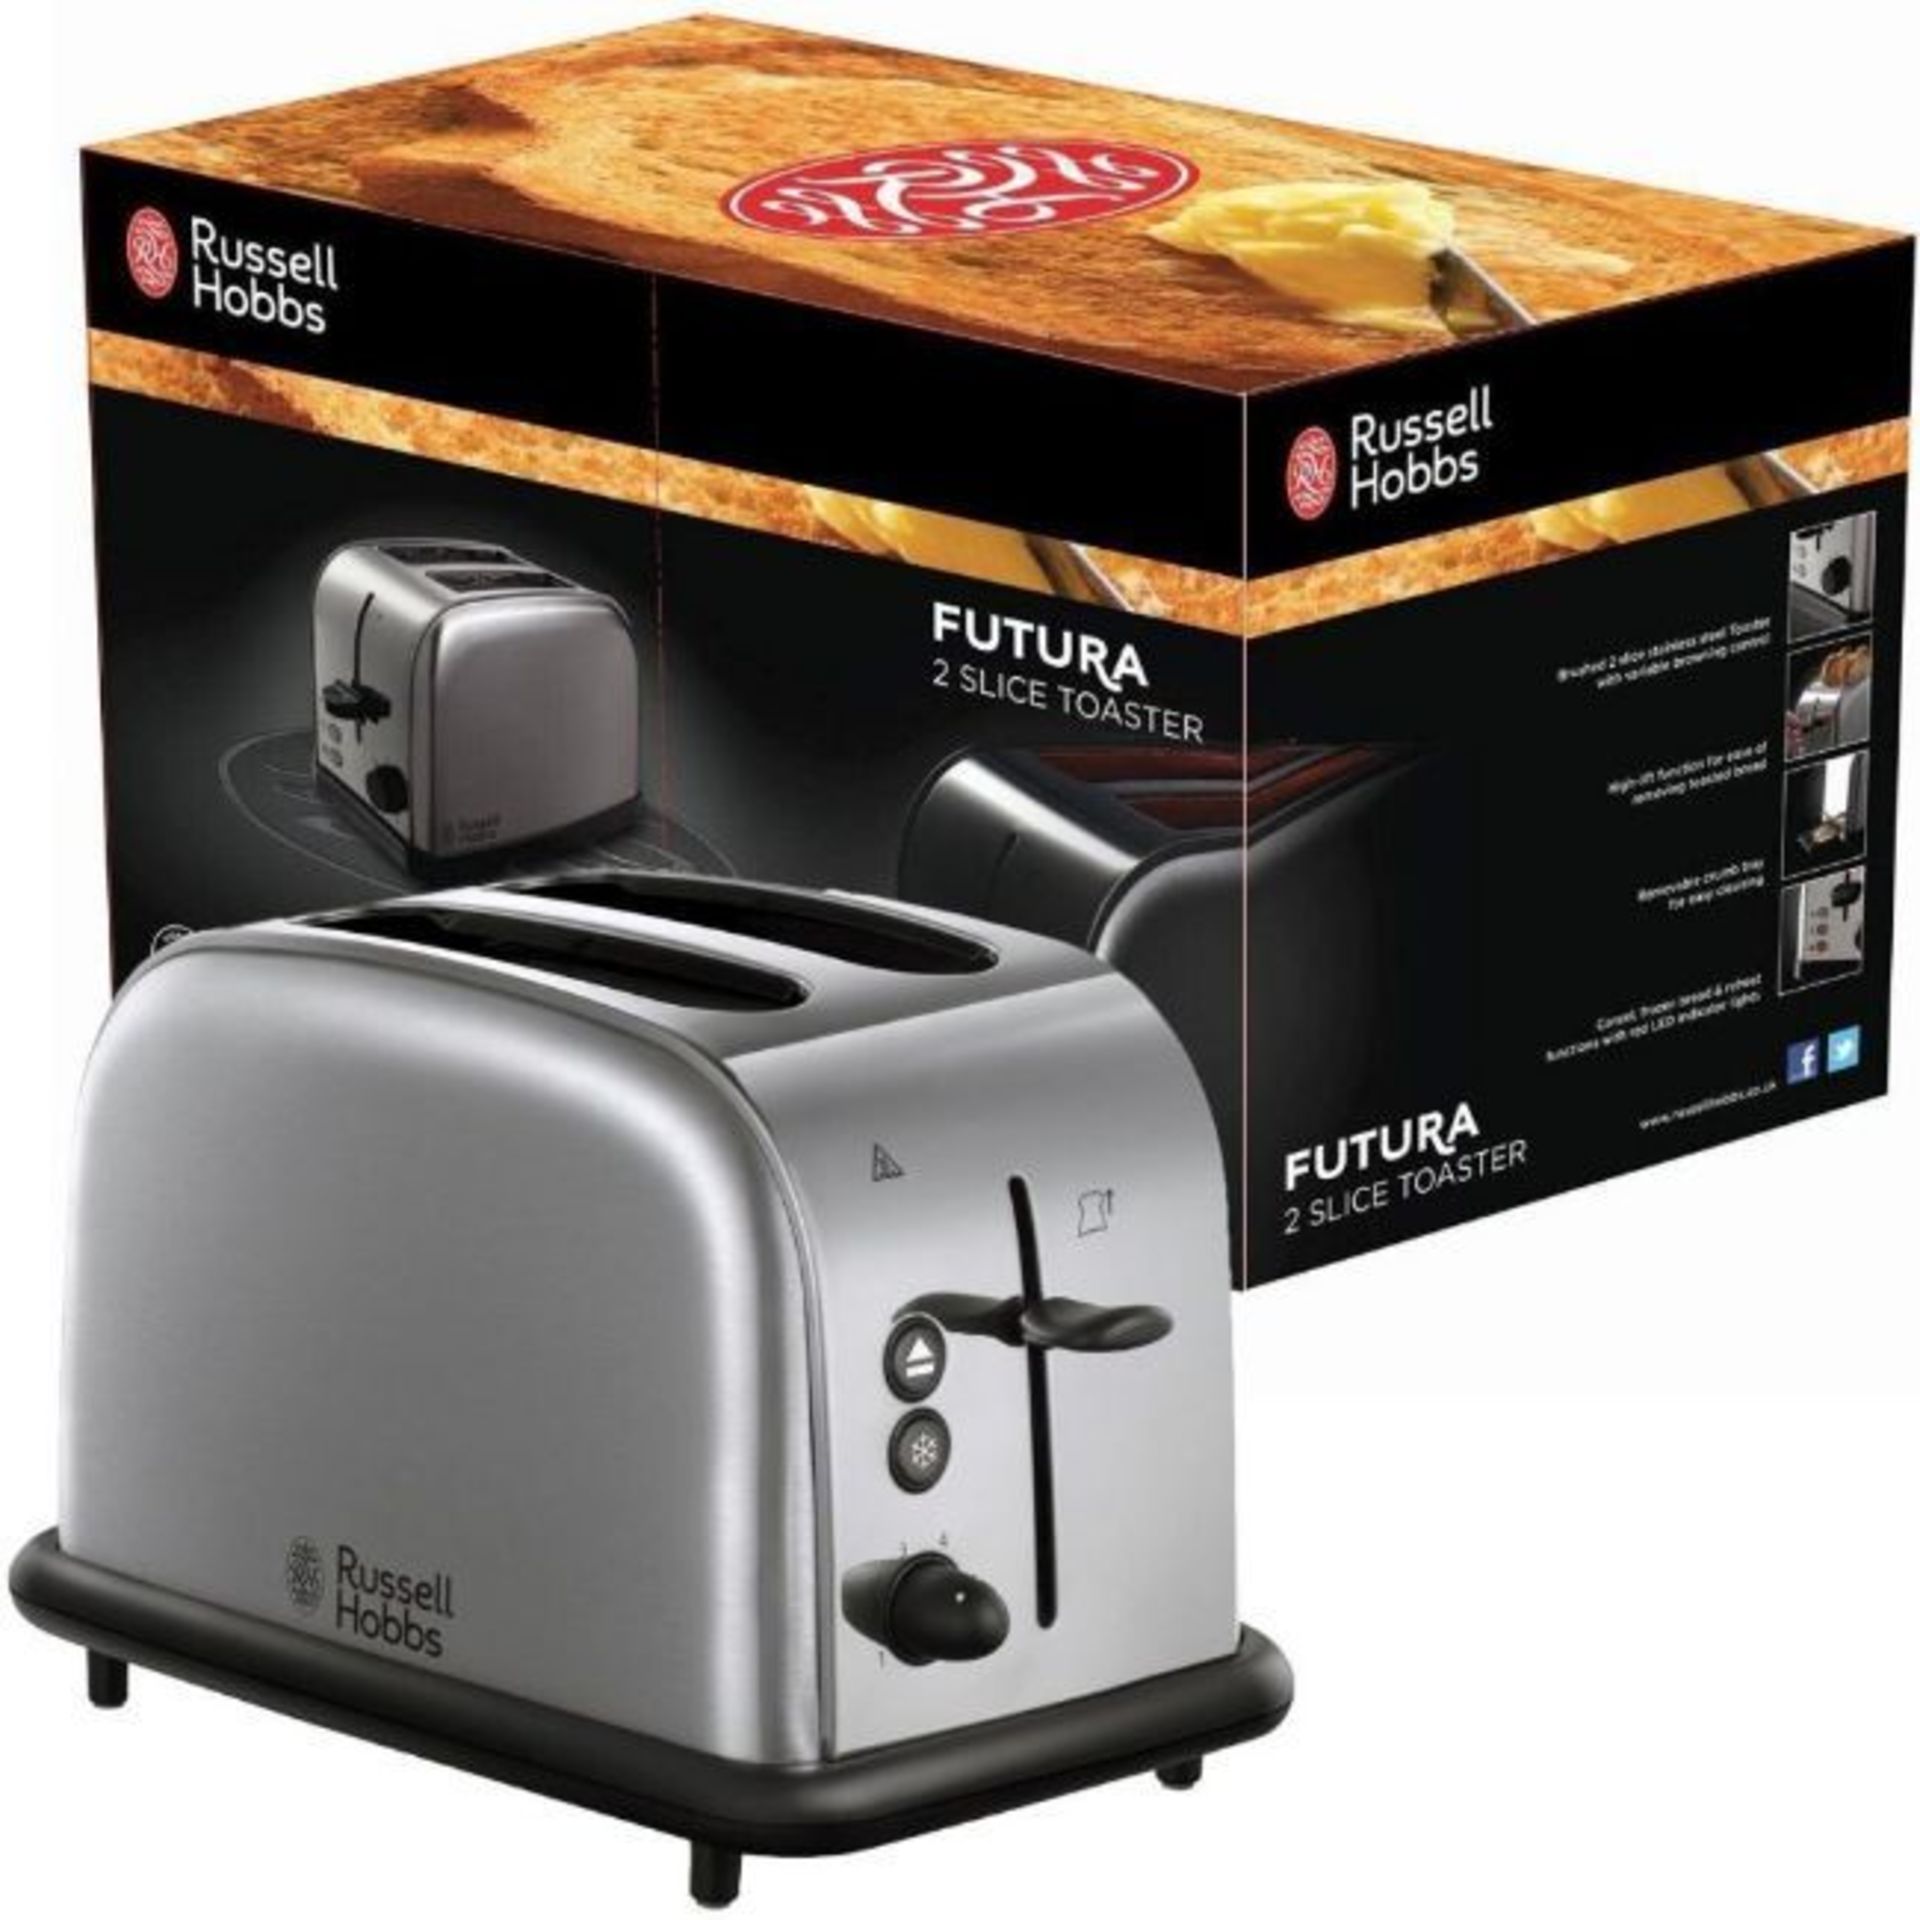 Brand New Russell Hobbs Futura 2 Slice Toaster - Brushed Stainless Steel RRP £40